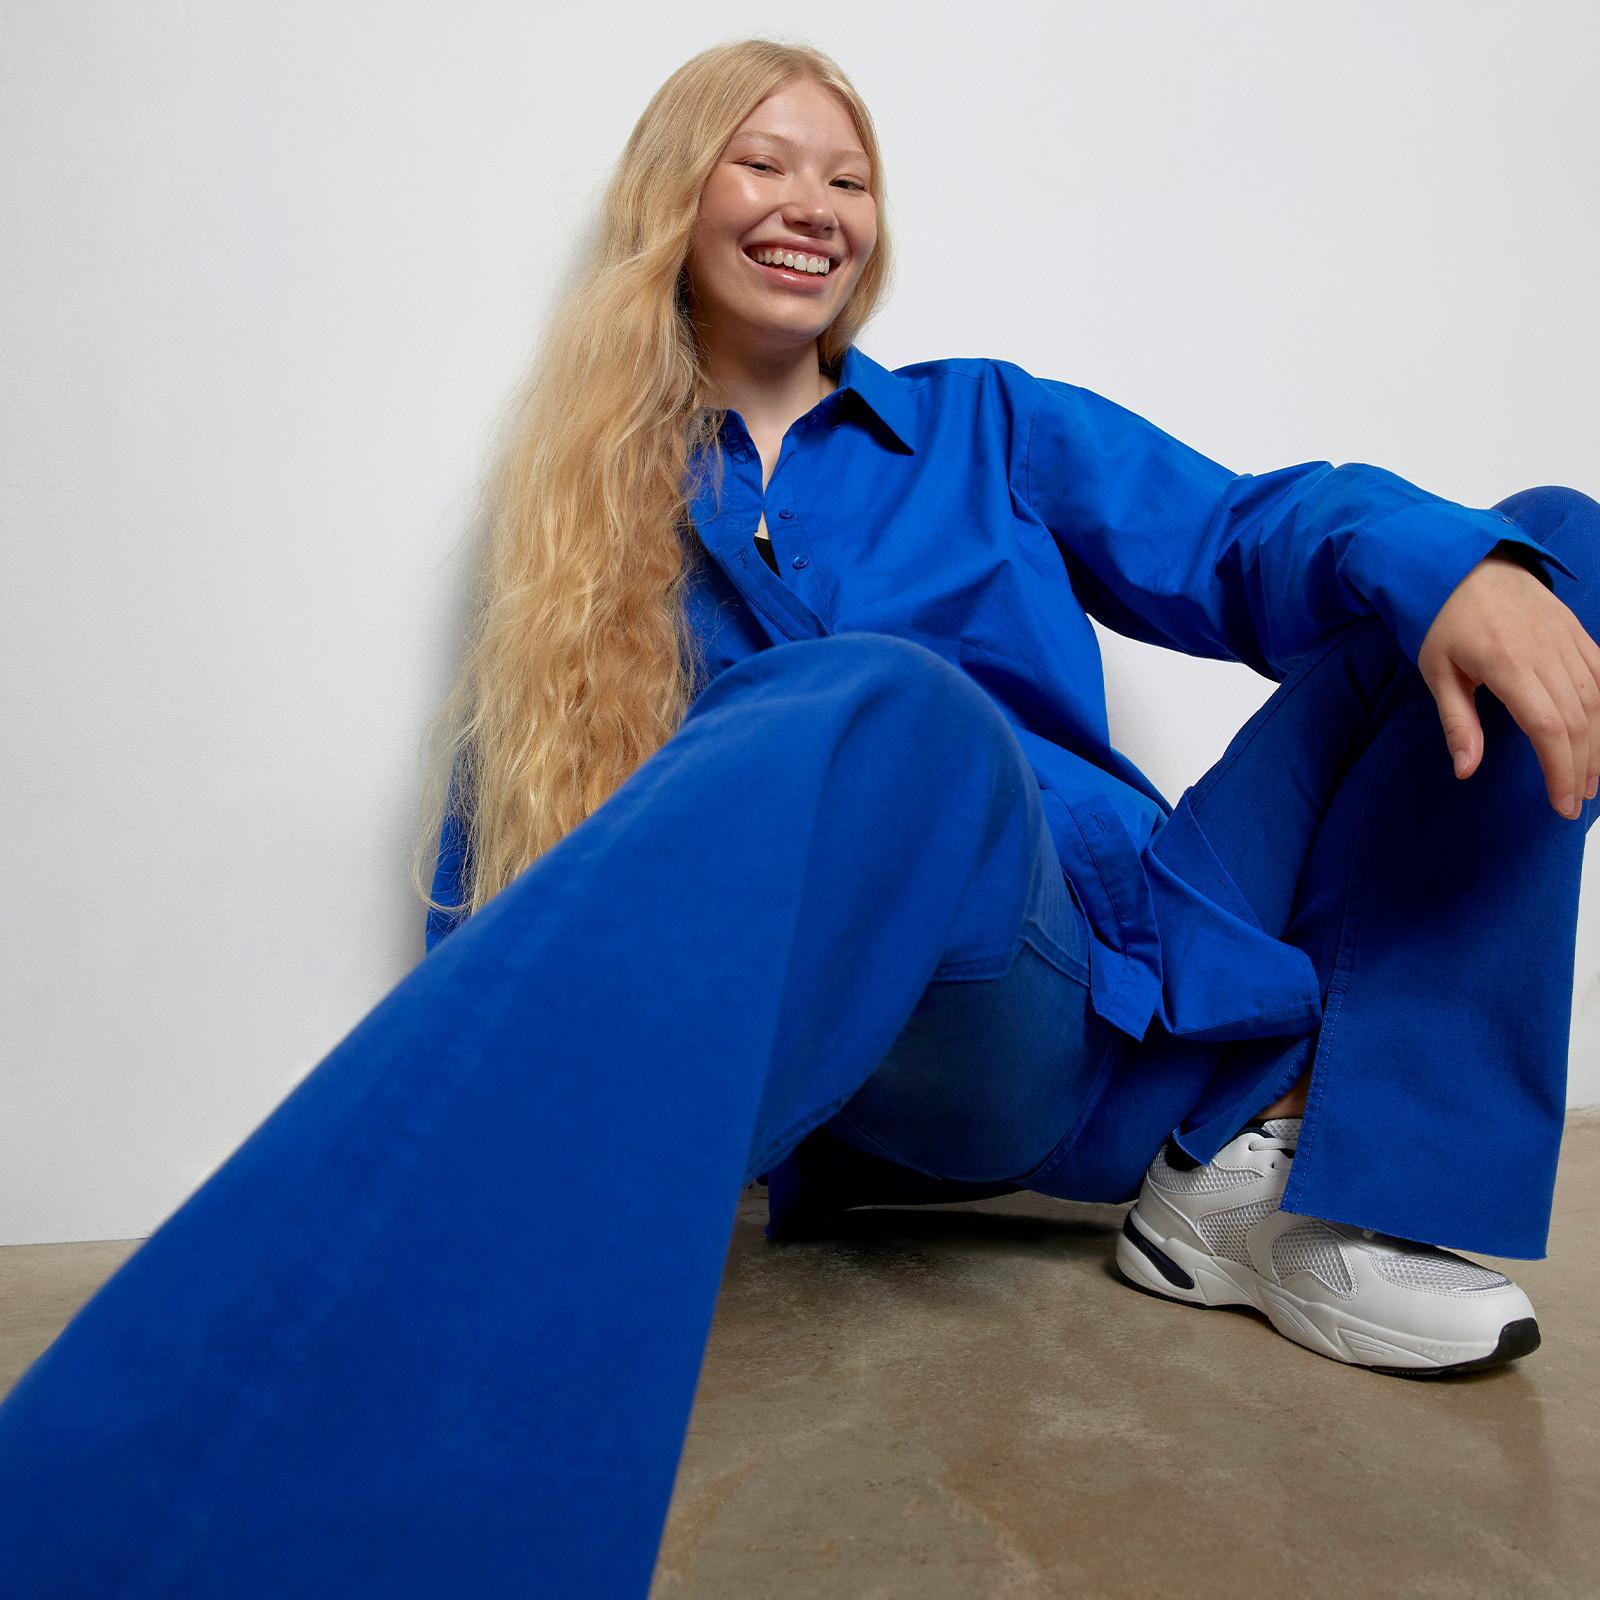 Model wearing electric blue flared jeans